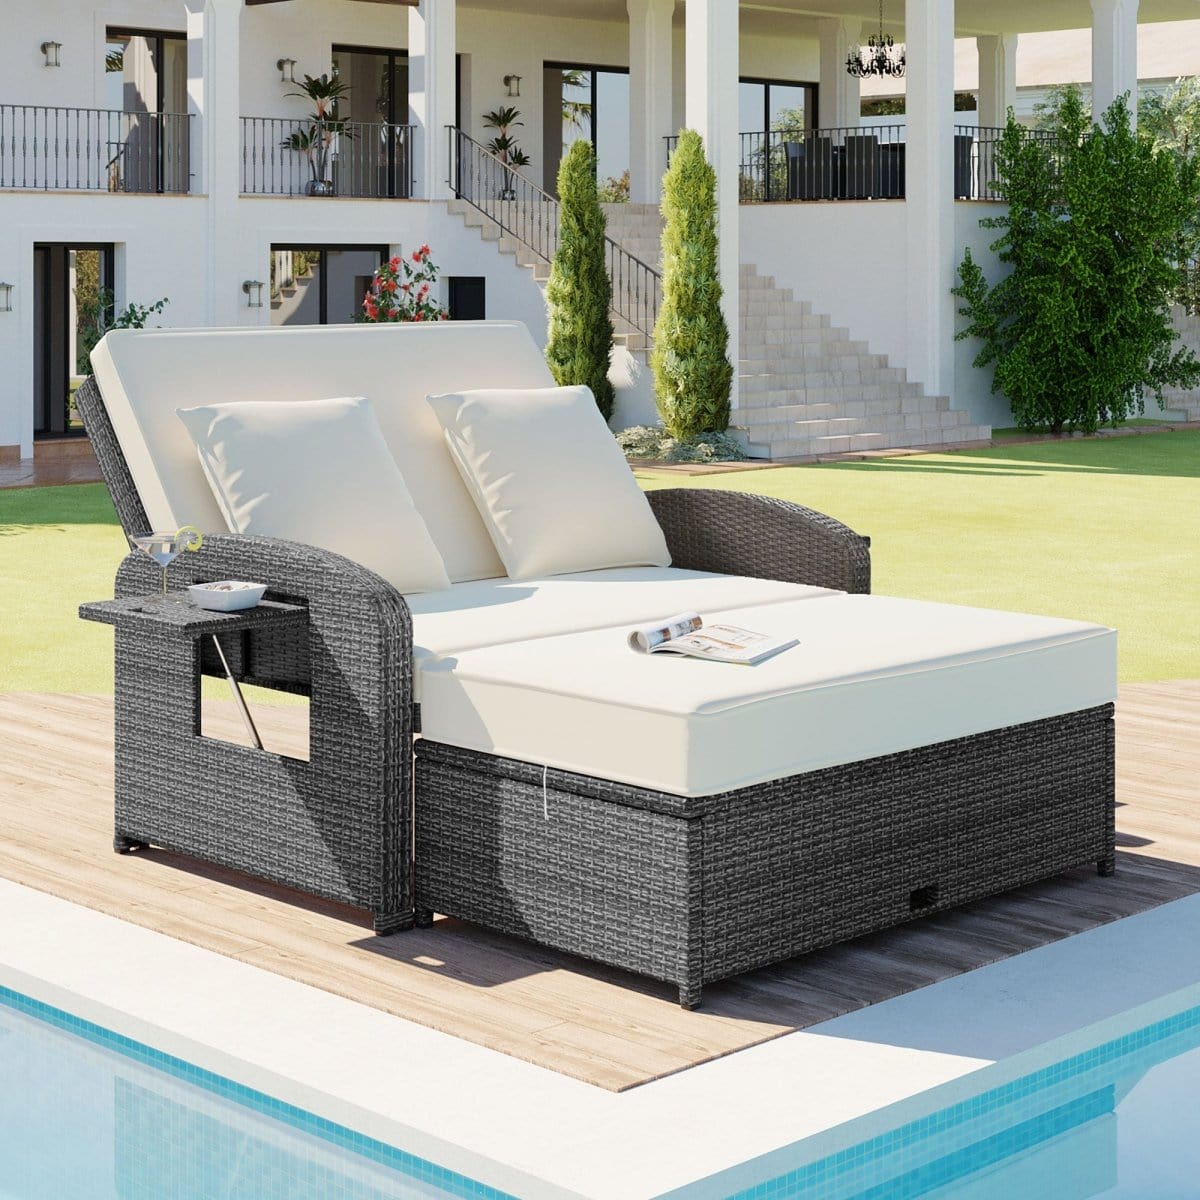 2 Person Outdoor Daybed with Built-in Tables1Topmaxx